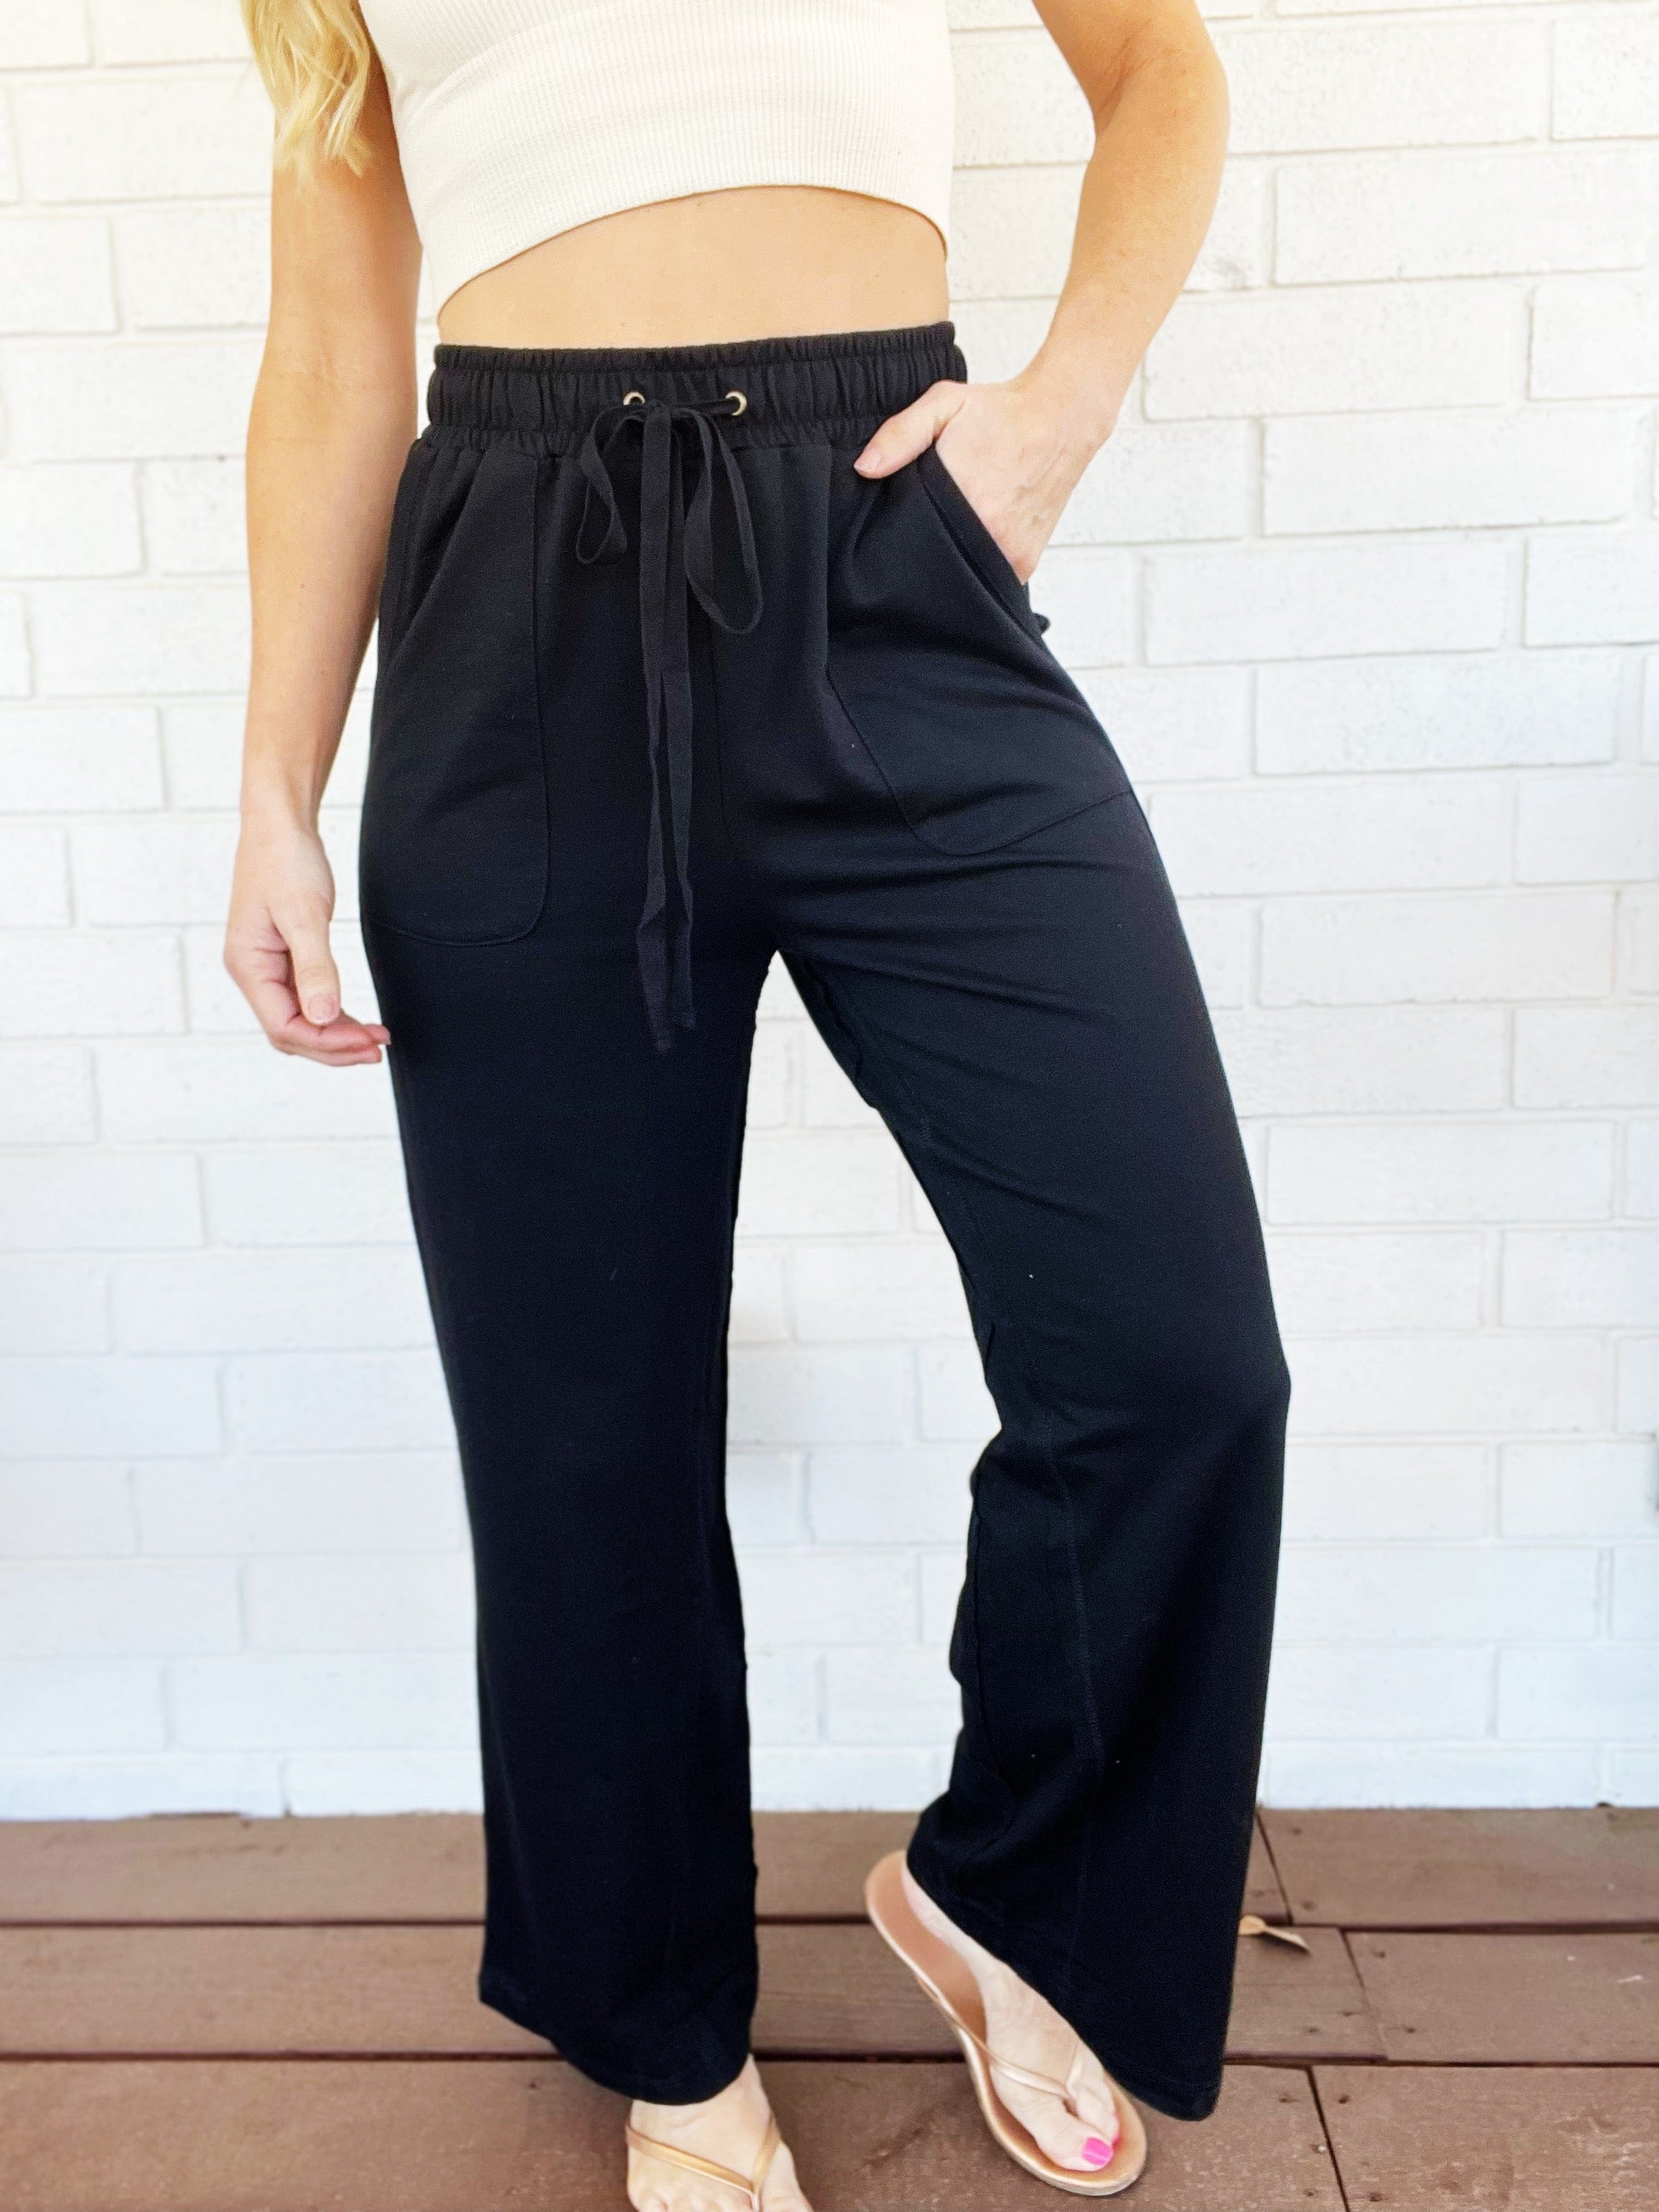 Washed Cotton French Terry Casual Pants-Black - Infinity Raine